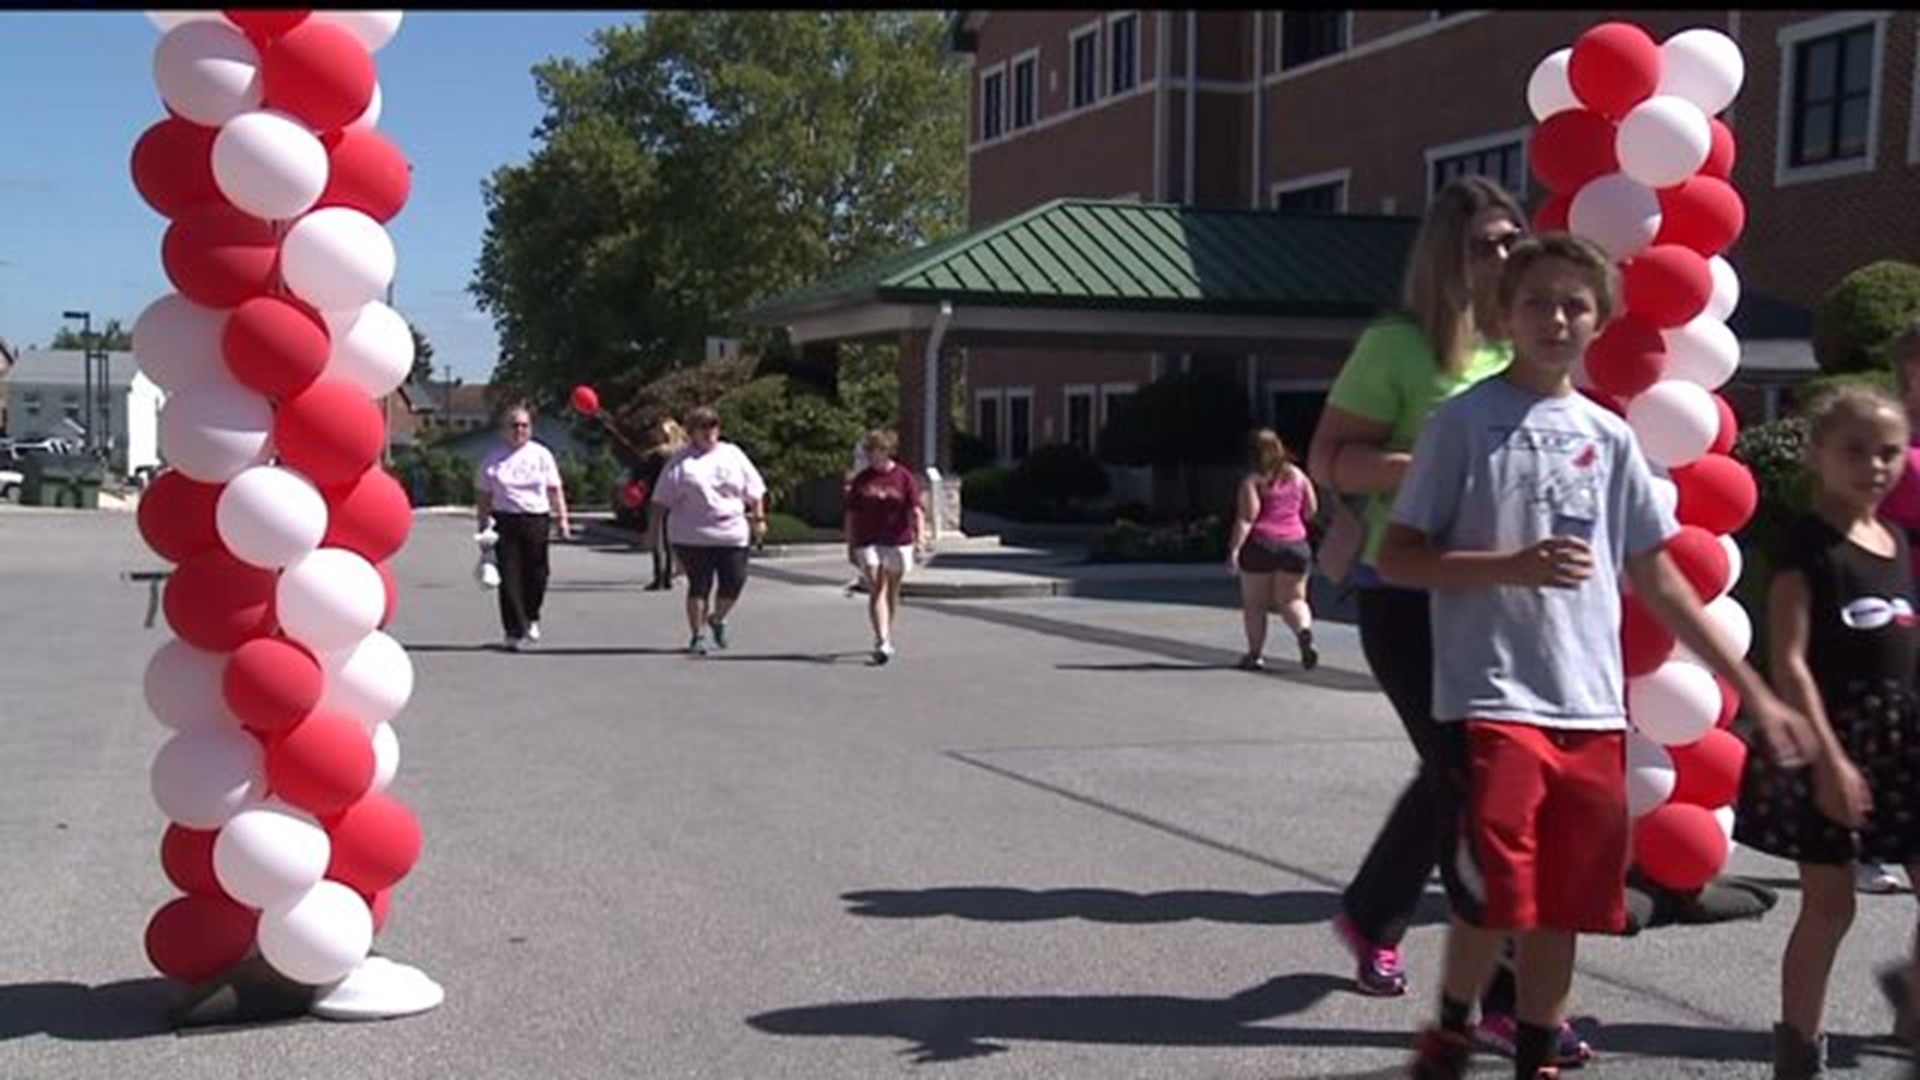 People in Hanover are helping to fight heart disease, one step at a time